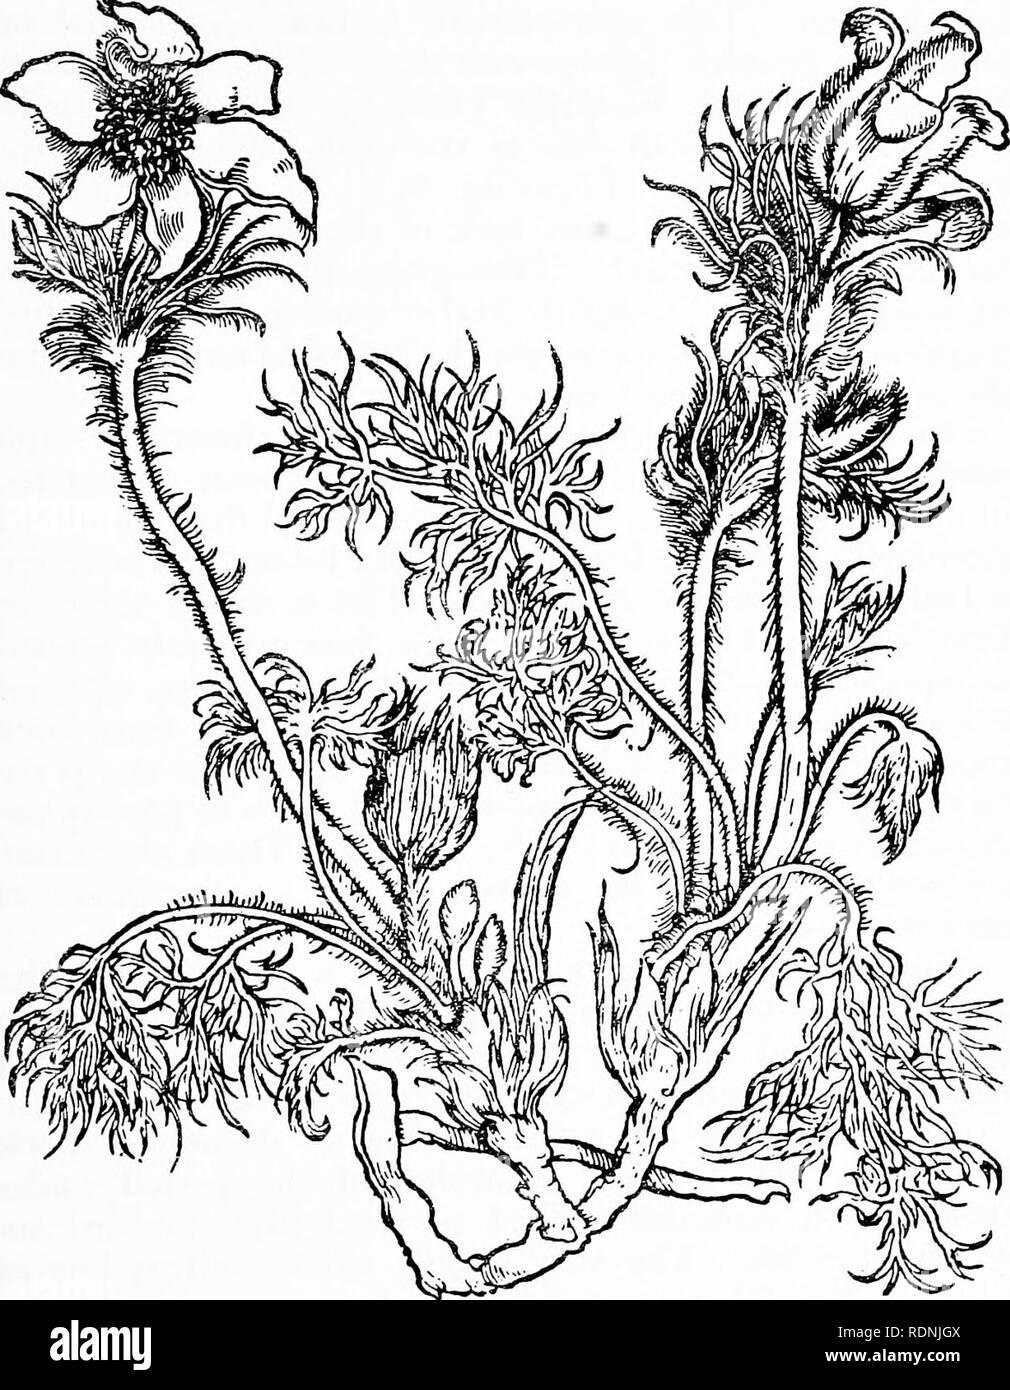 . Herbals, their origin and evolution, a chapter in the history of botany, 1470-1670. Botany; Botany; Herbals. vn] Hans Weiditz 171 independently at what was perhaps its high-water mark of ex- cellence, but it is in Brunfels' great work that we find it, for the first time, applied to the illustration of a botanical book.. Text-fig. 83. ''â YMc'atrisea^W''= Anemone Pulsatilla L., Pasque-flower [Brunfels, Herbarum viva eicones, Vol. I. 1530]. Reduced. The illustrations in Brunfels' herbal were engraved, and probably drawn also, by Hans Weiditz, or Guiditius, some of whose work has been ascribed  Stock Photo